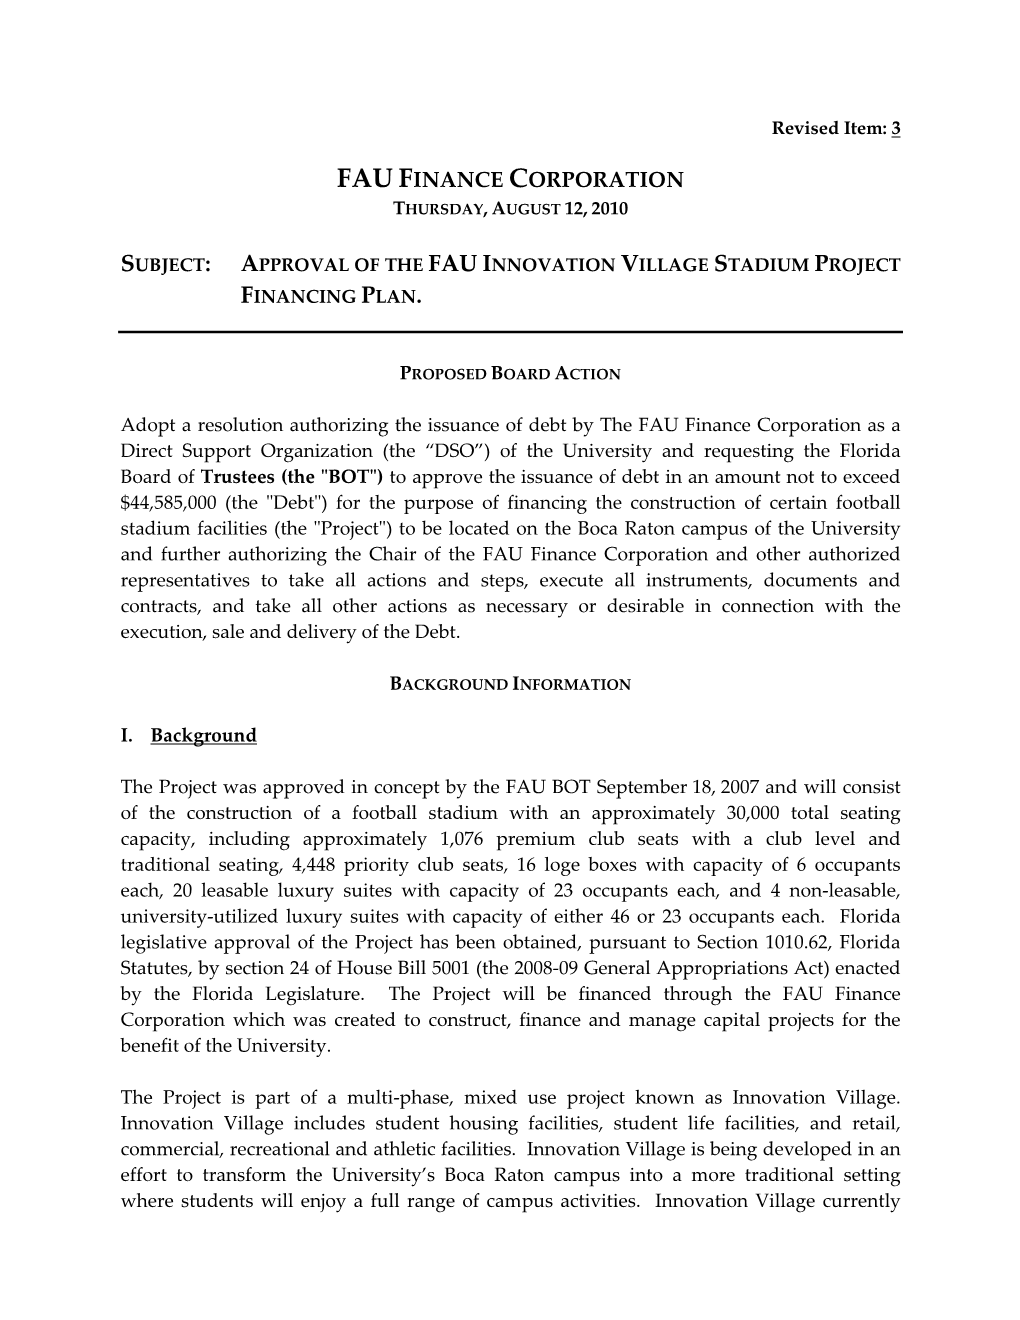 Approval of the Fau Innovation Village Stadium Project Financing Plan